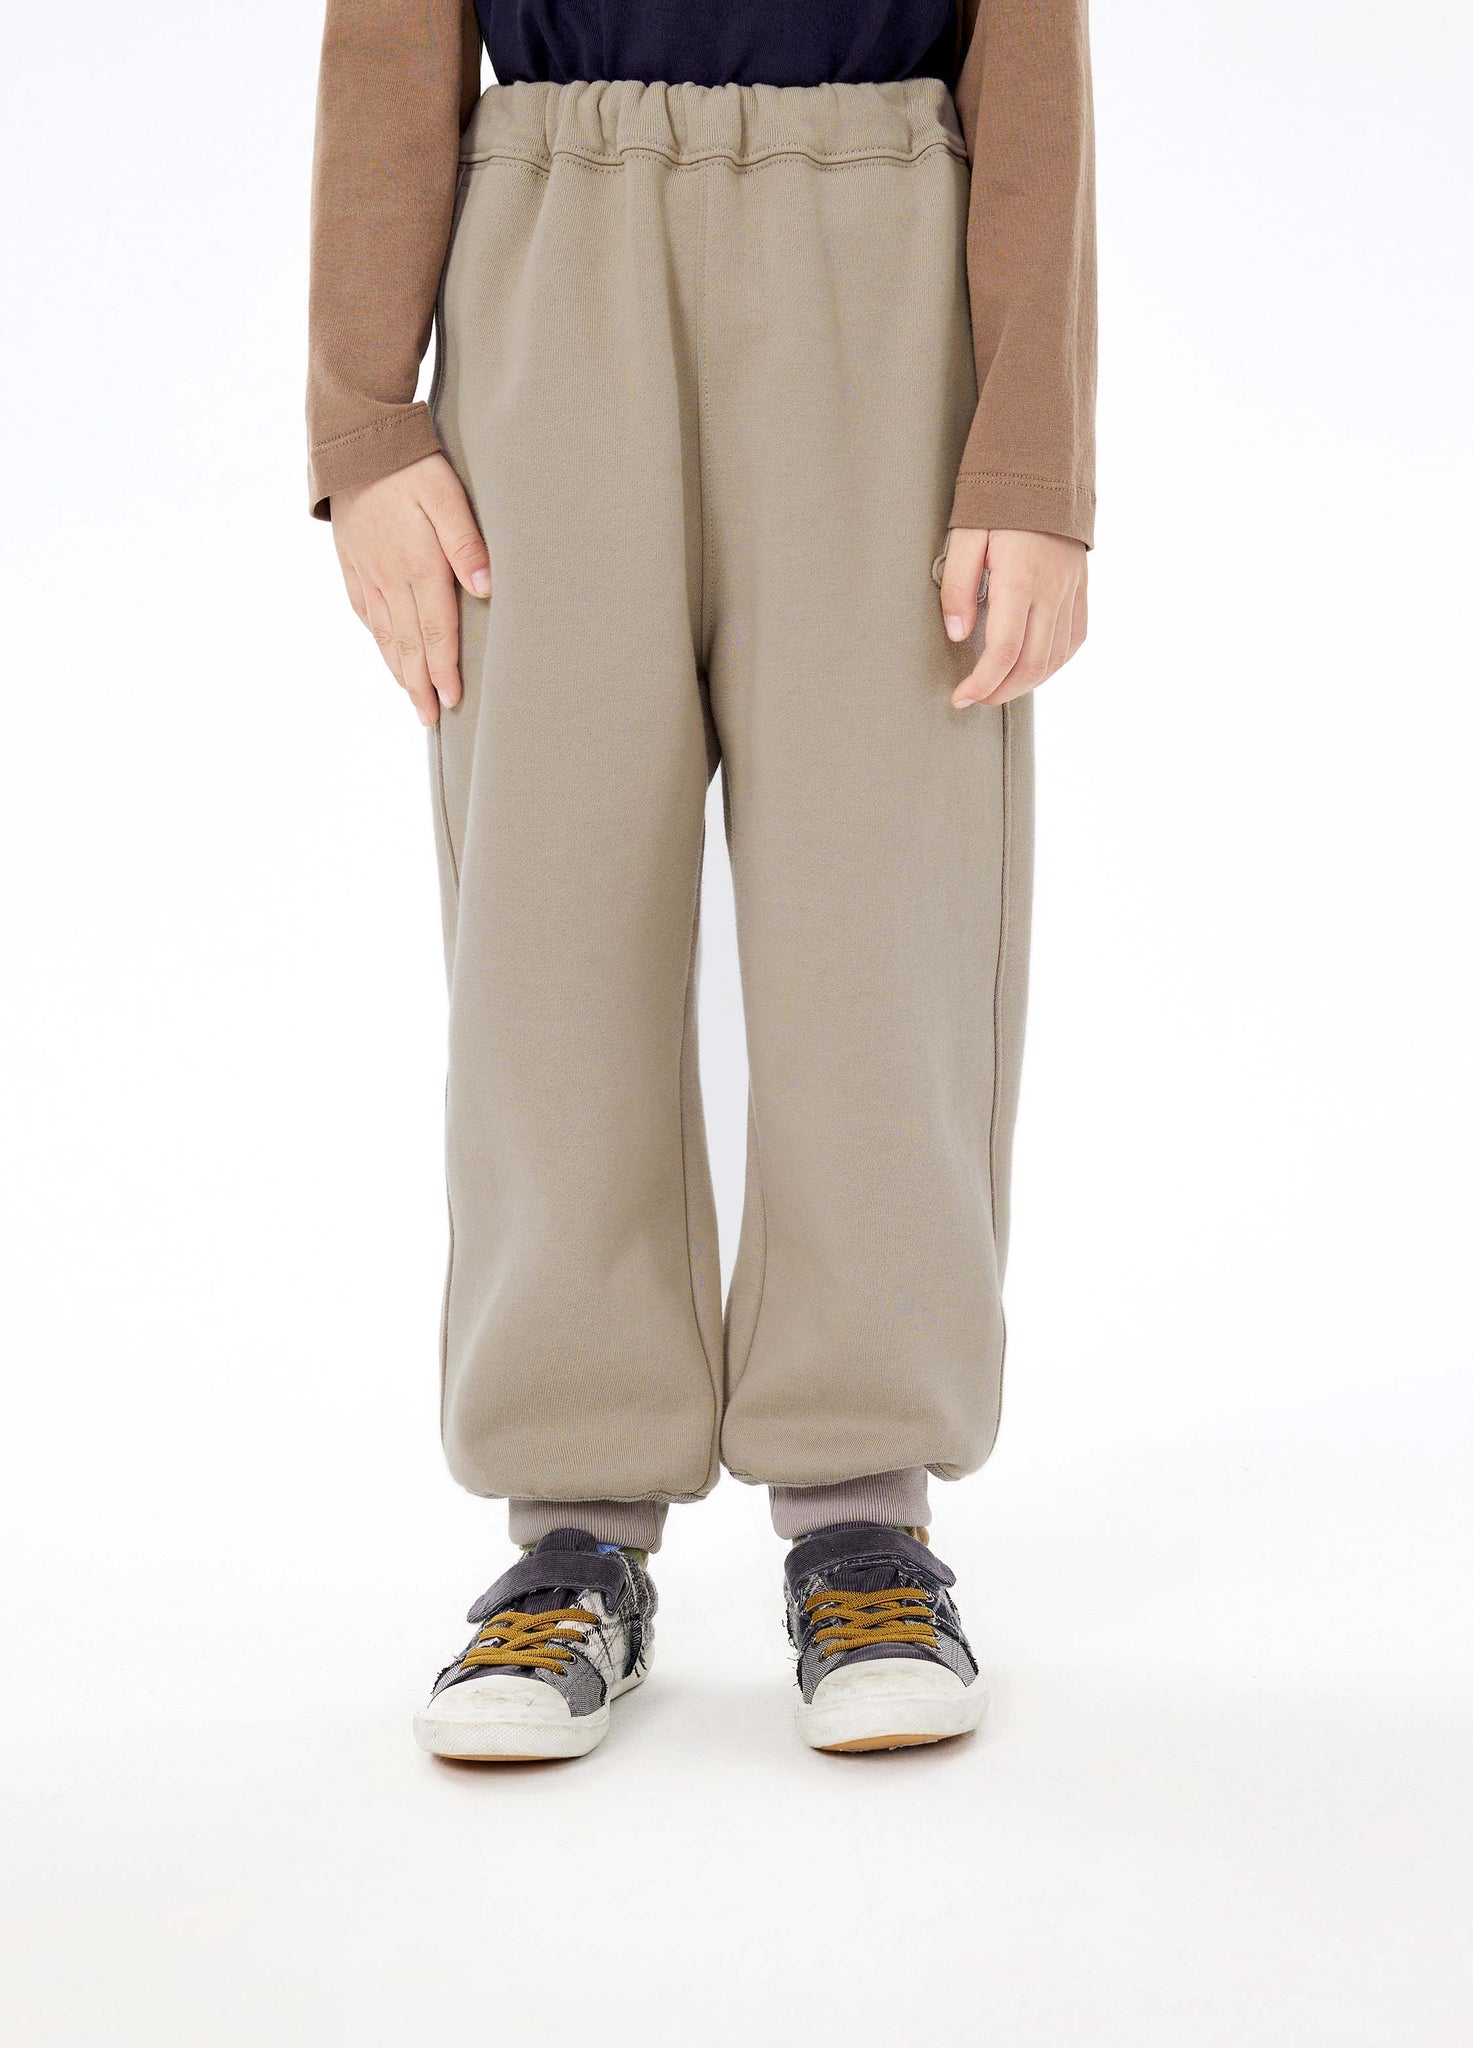 Pants / jnby by JNBY Elasticated Waist Trousers